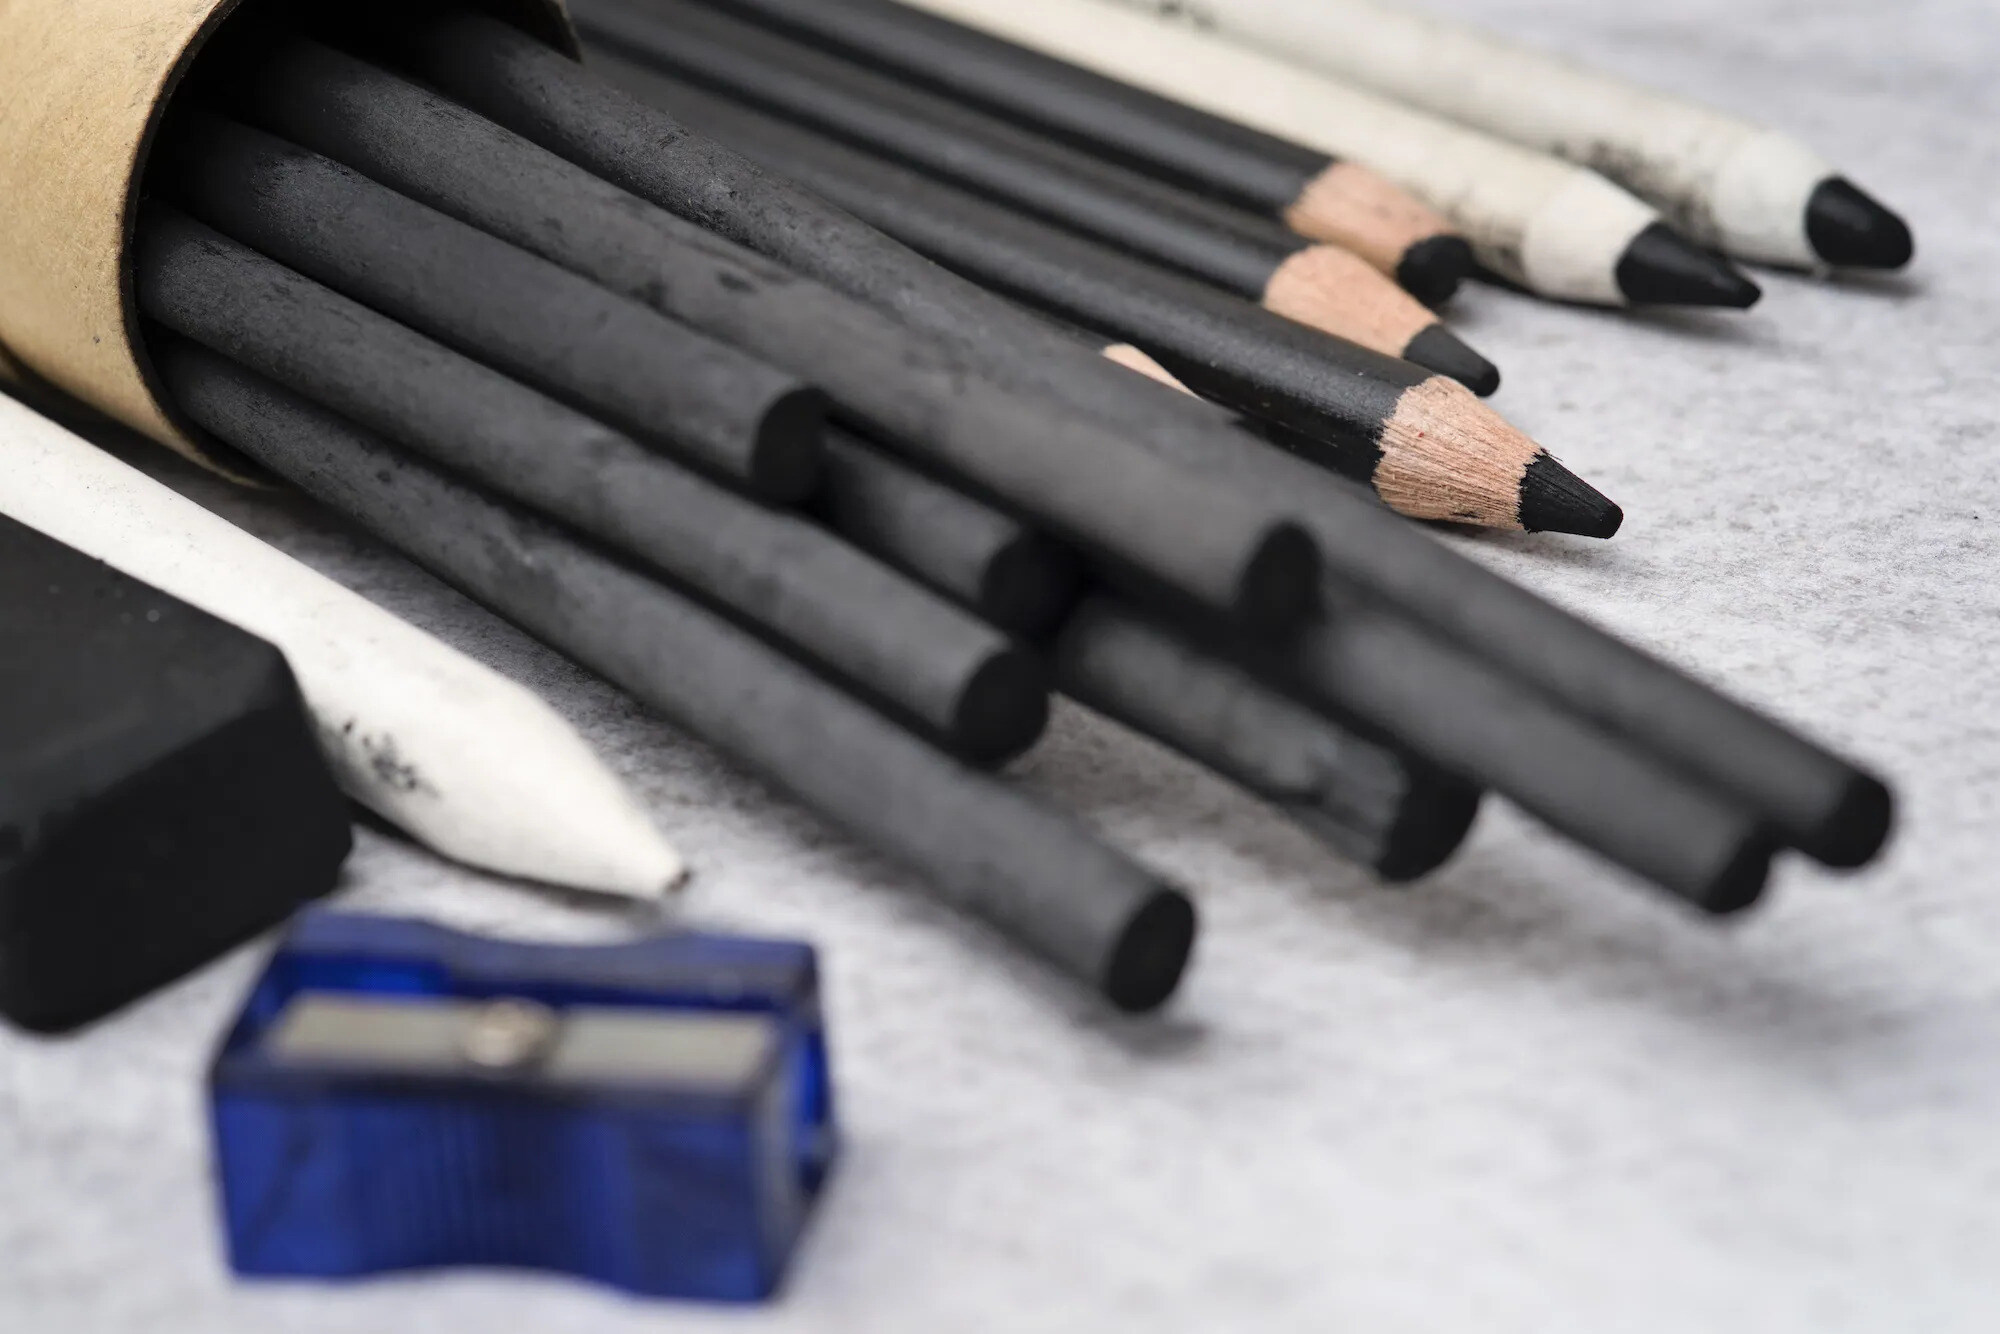 Charcoal Set Review: The Perfect Gift for Her